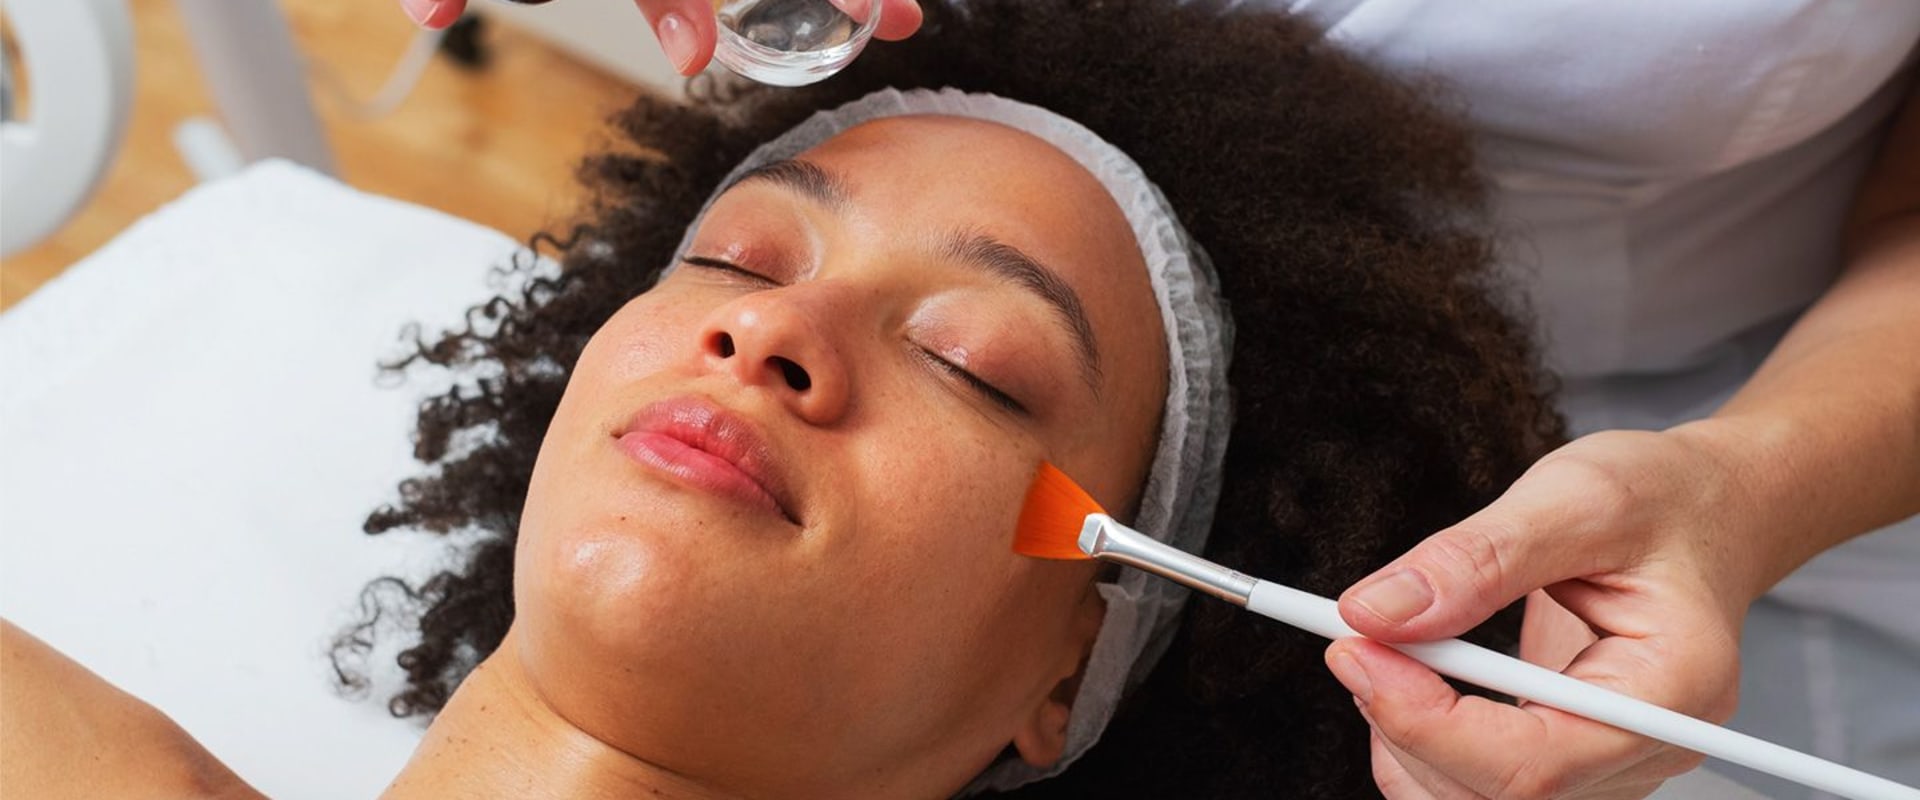 Beauty Treatments for People with Disabilities: A Comprehensive Guide